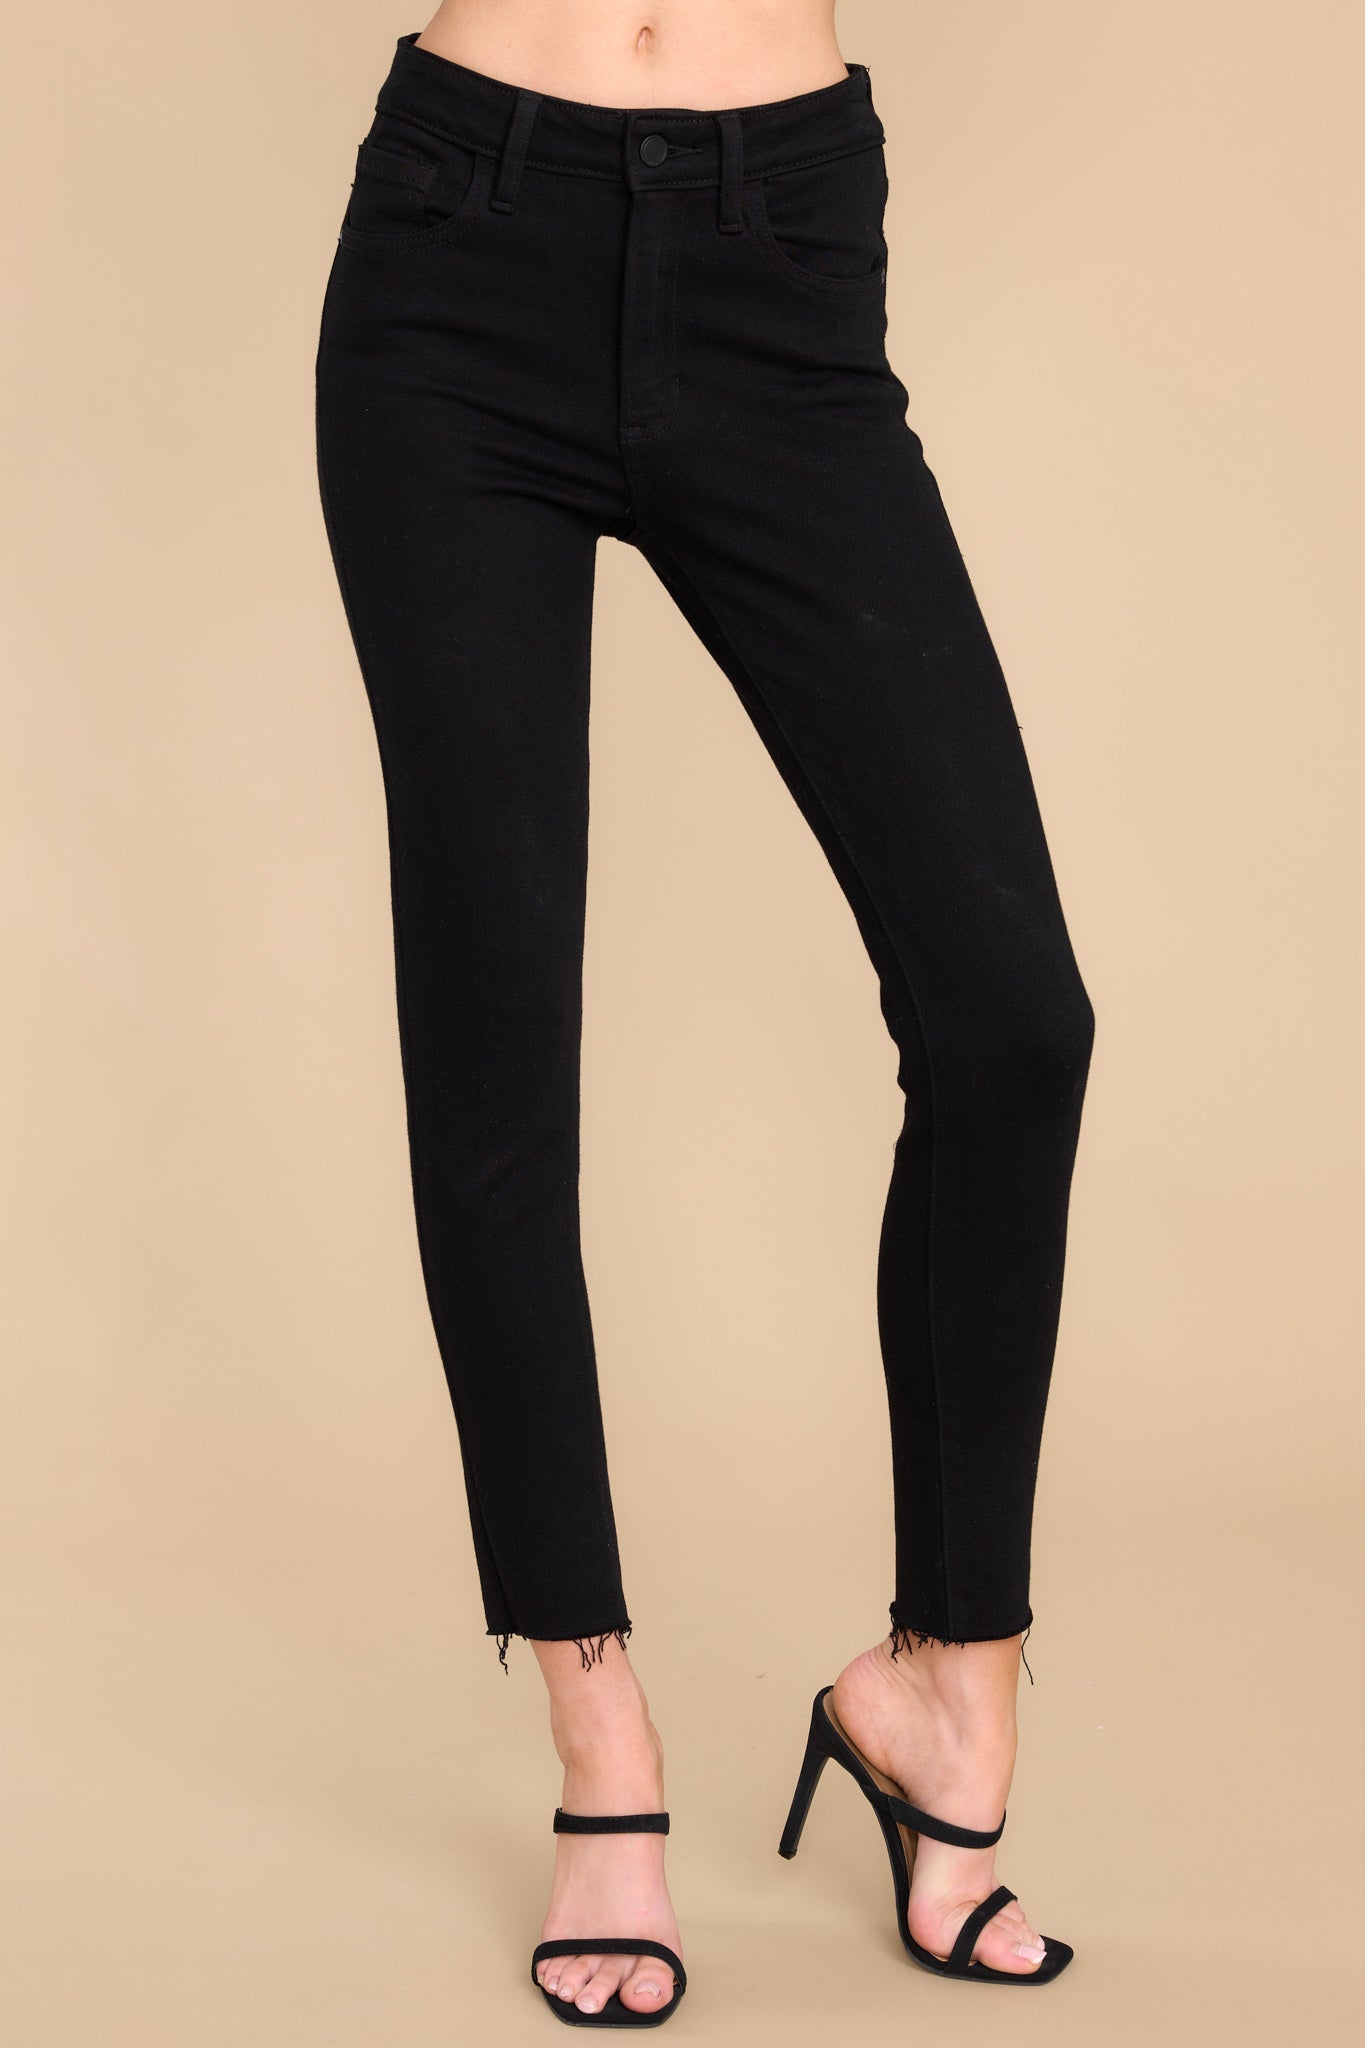 Essential Black Skinny Jeans - All Bottoms | Red Dress